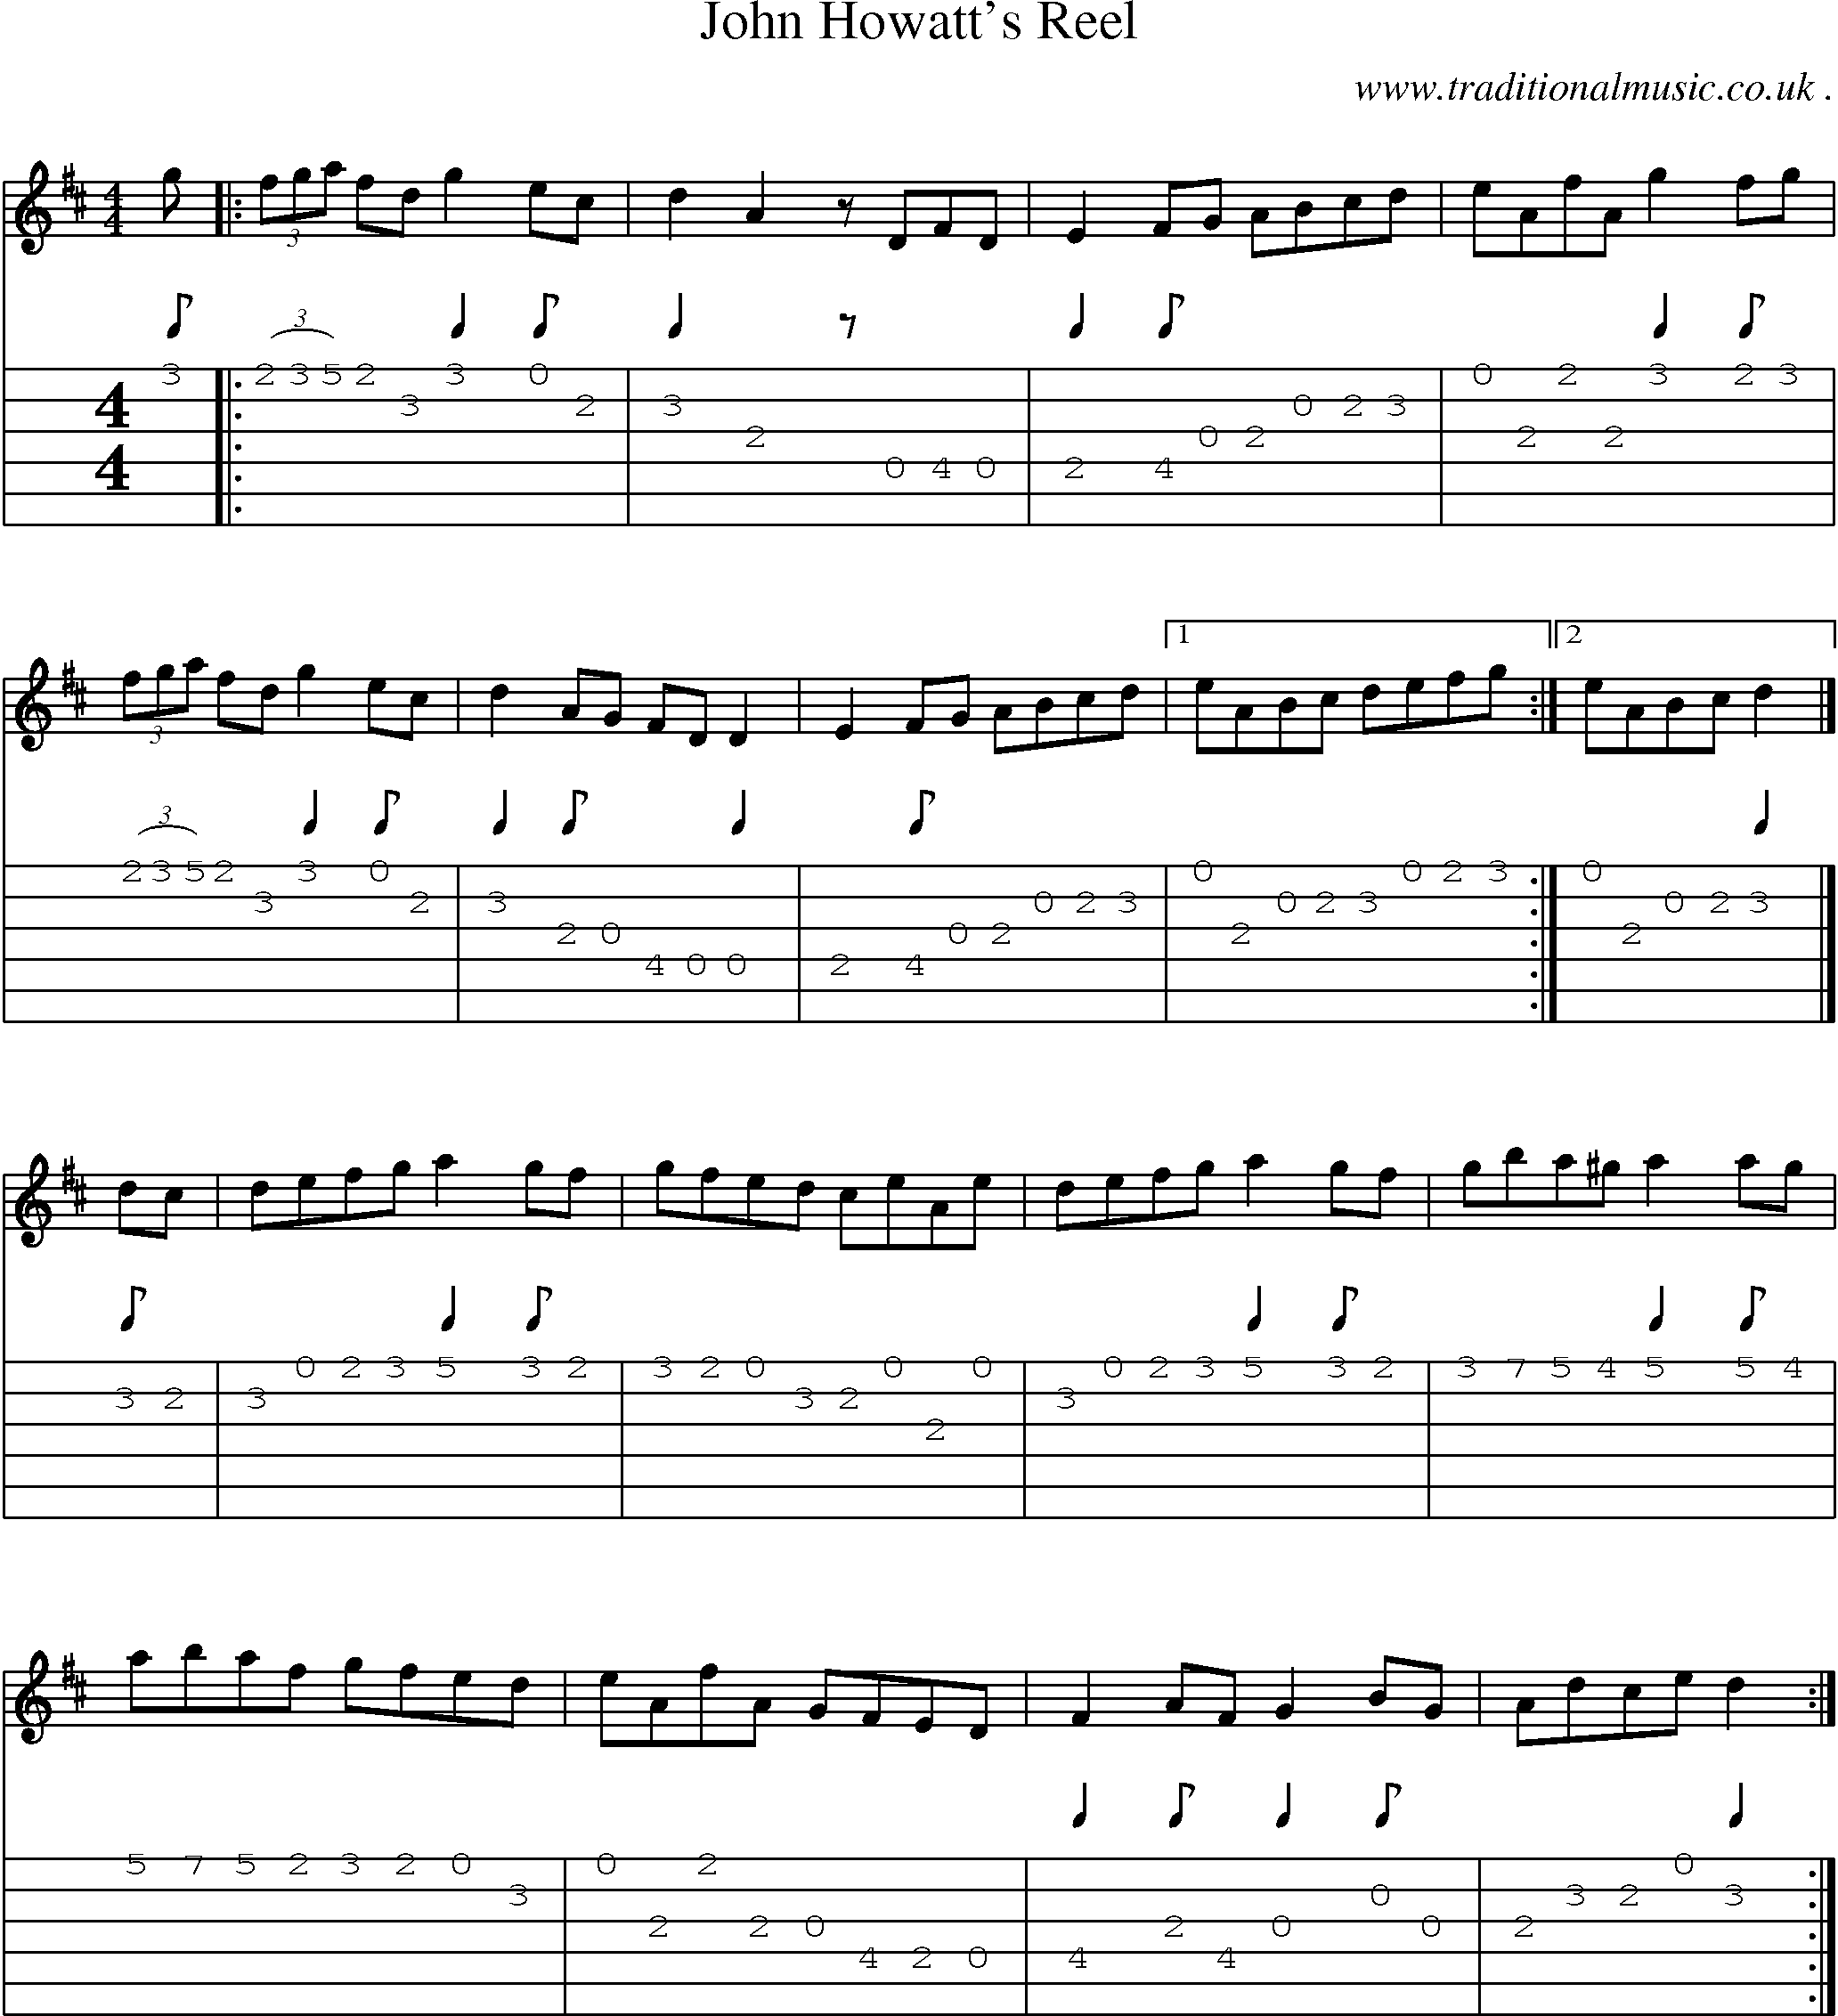 Sheet-music  score, Chords and Guitar Tabs for John Howatts Reel